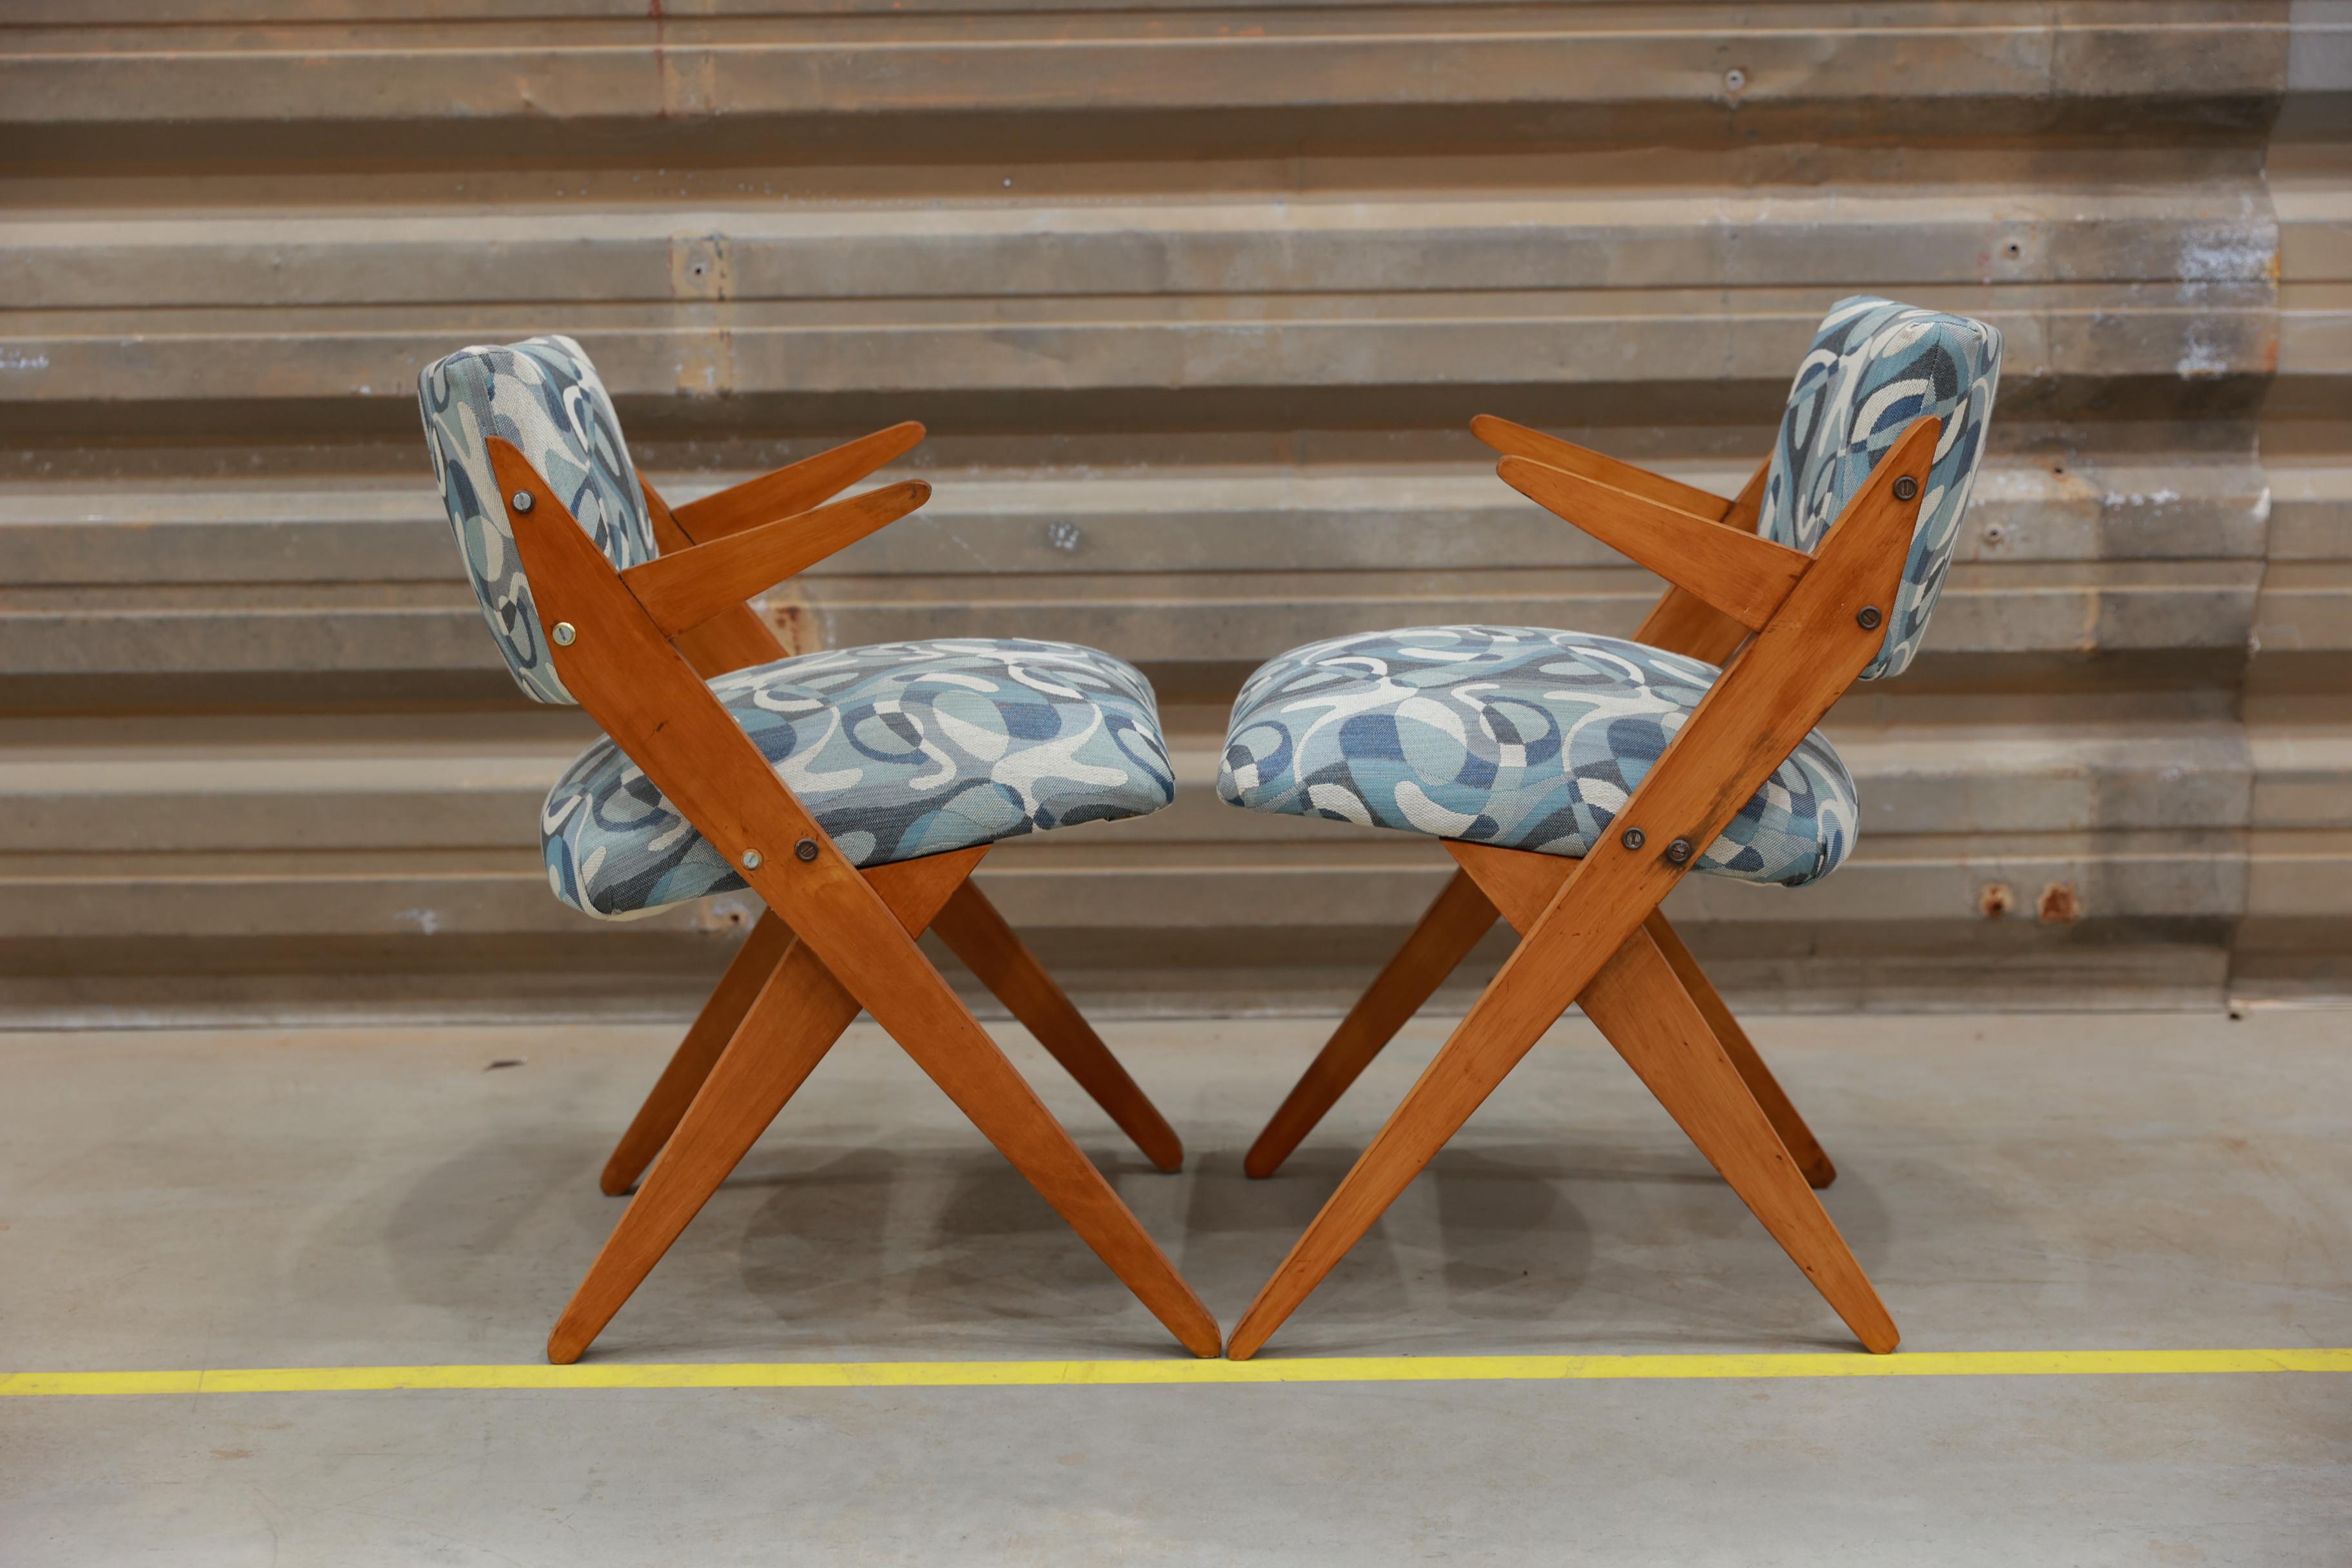 20th Century Brazilian Modern Armchairs in hardwood & floral upholstery by Jose Zanine Caldas For Sale